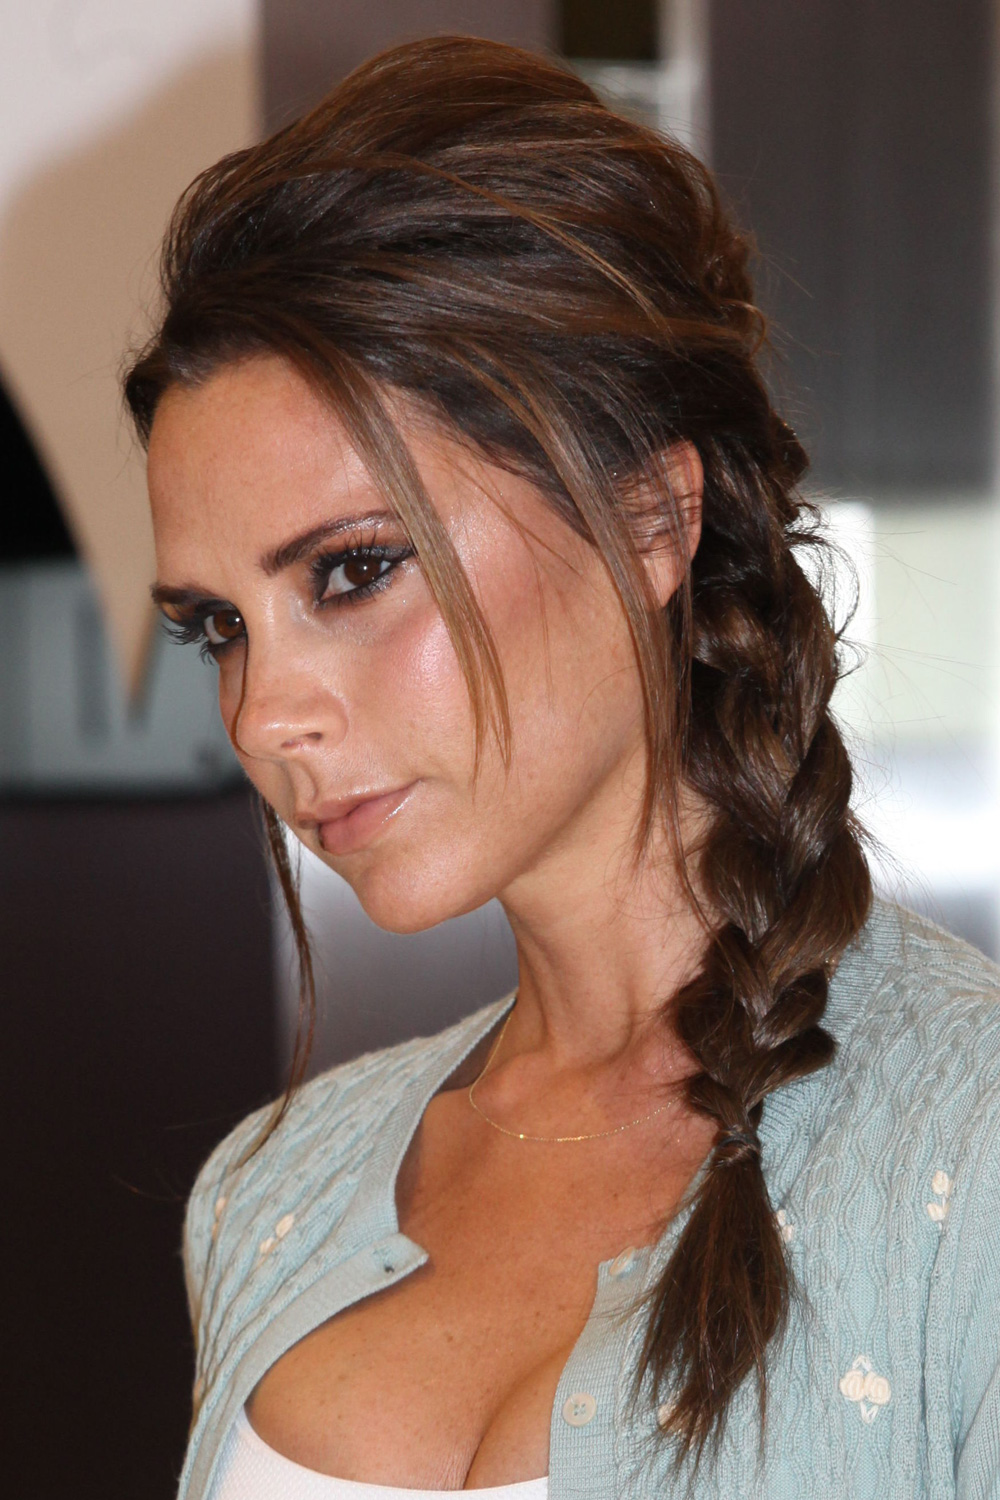 Victoria Beckham Debuts A New Hairstyle Just In Time For 